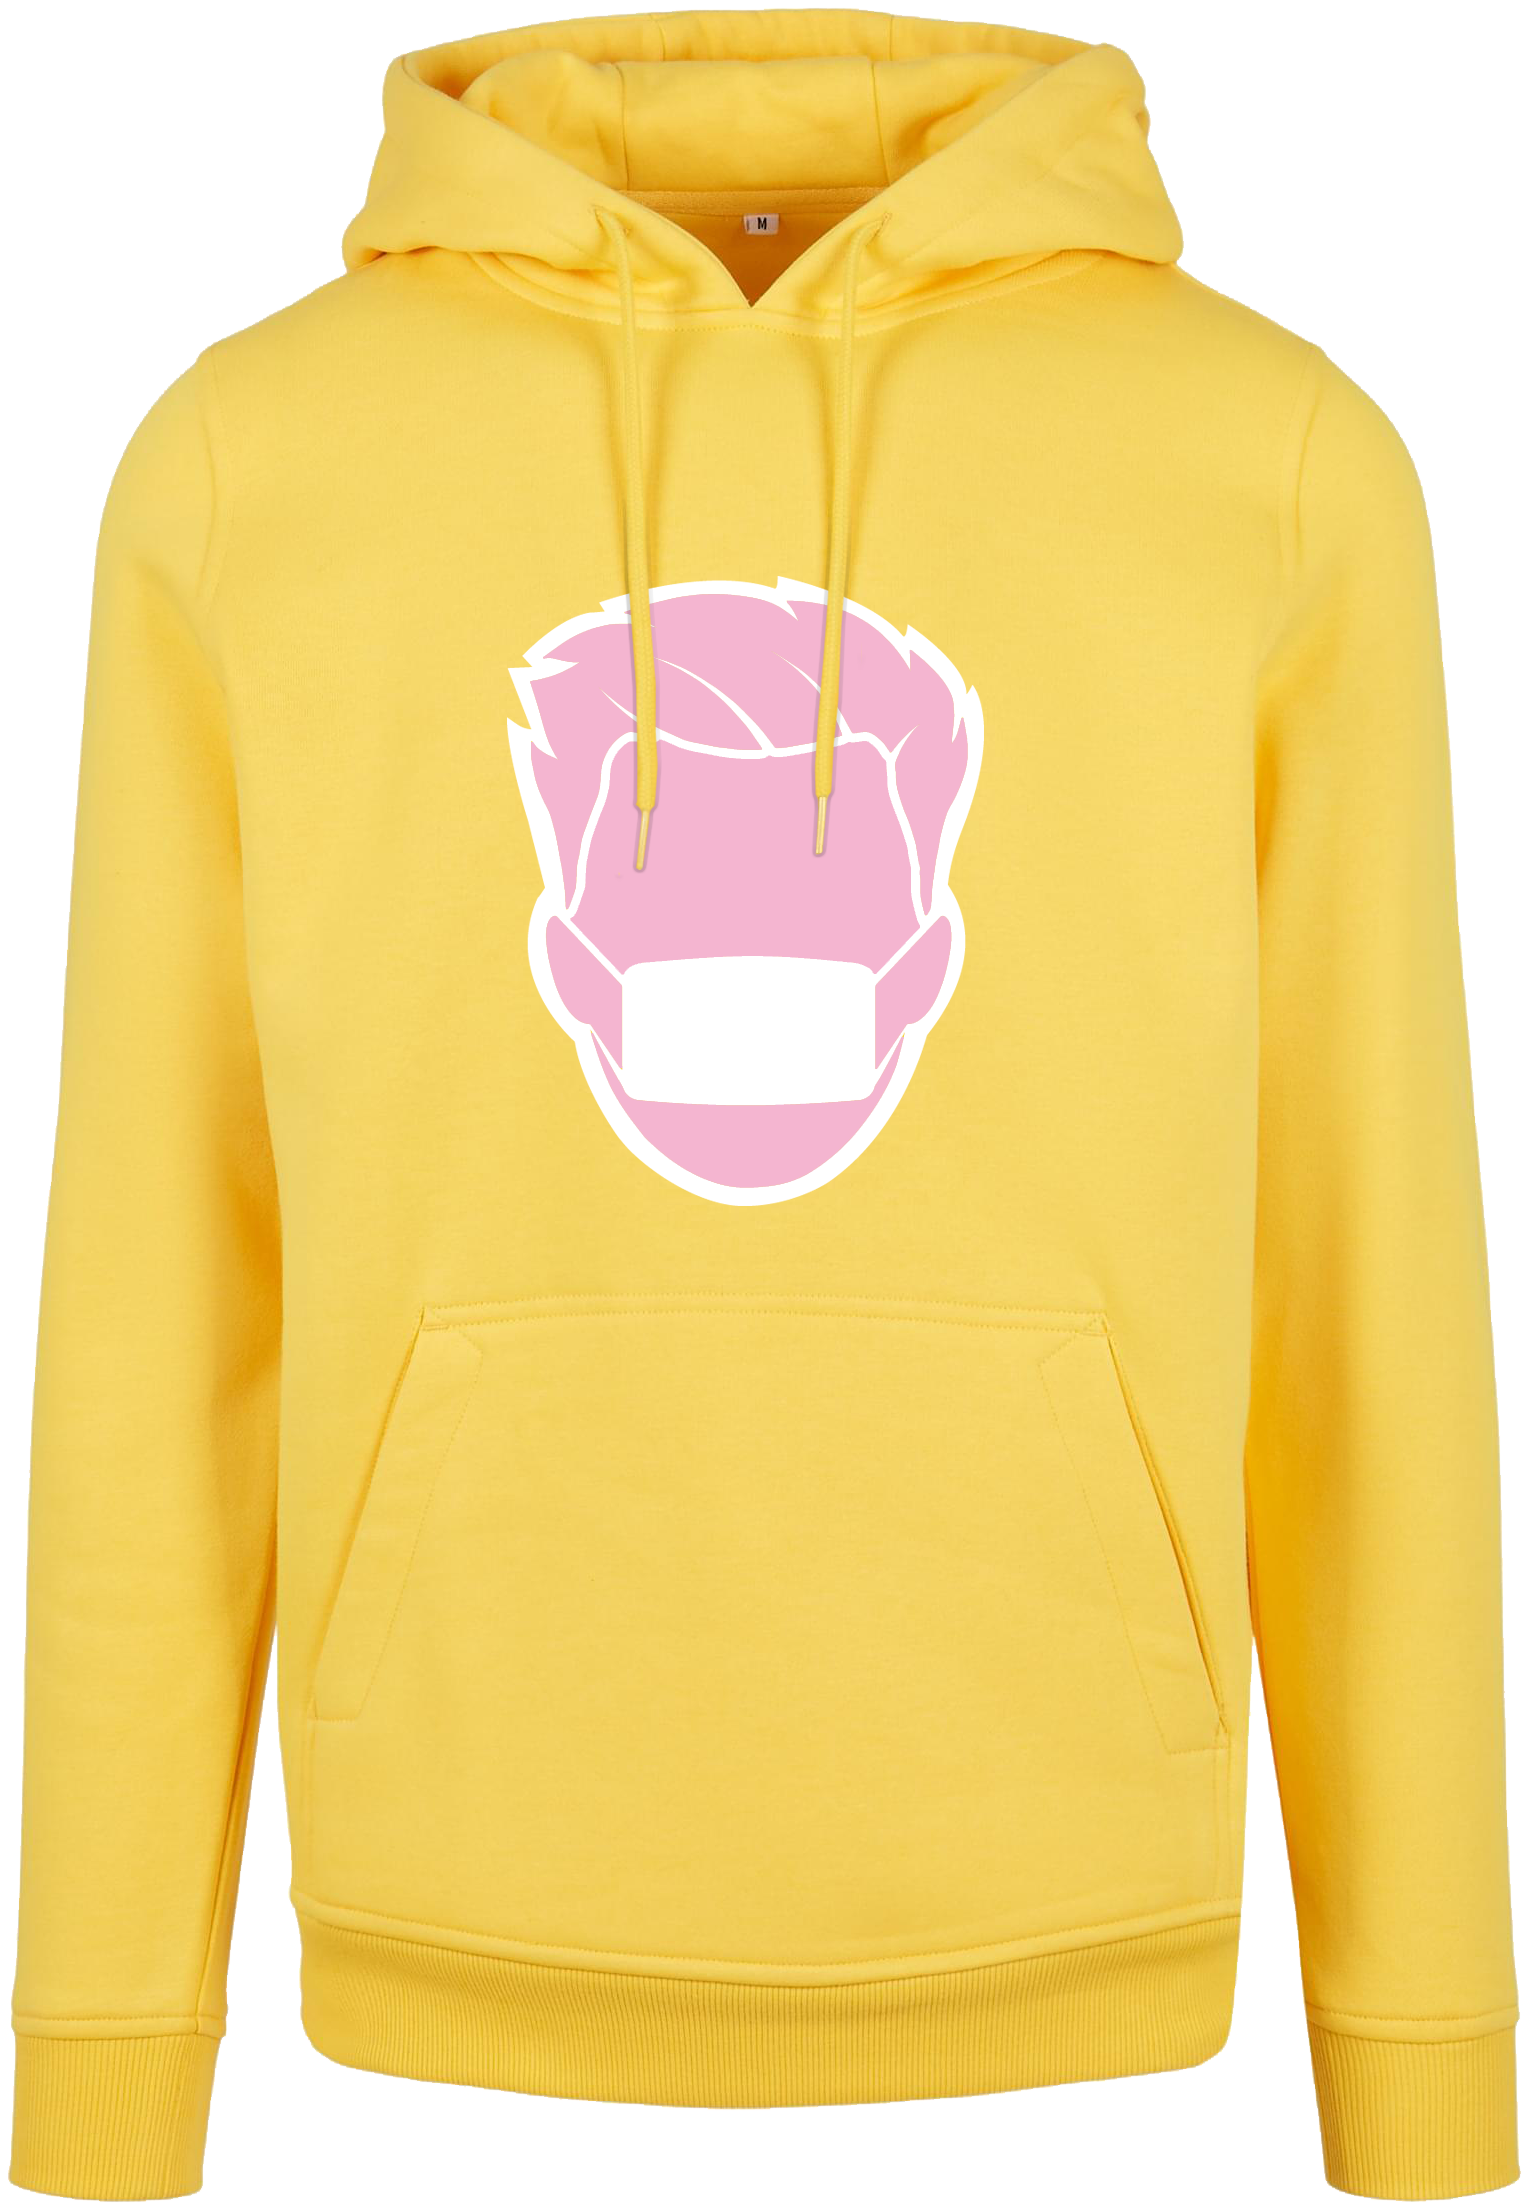 Pinky taxi yellow Hoodie